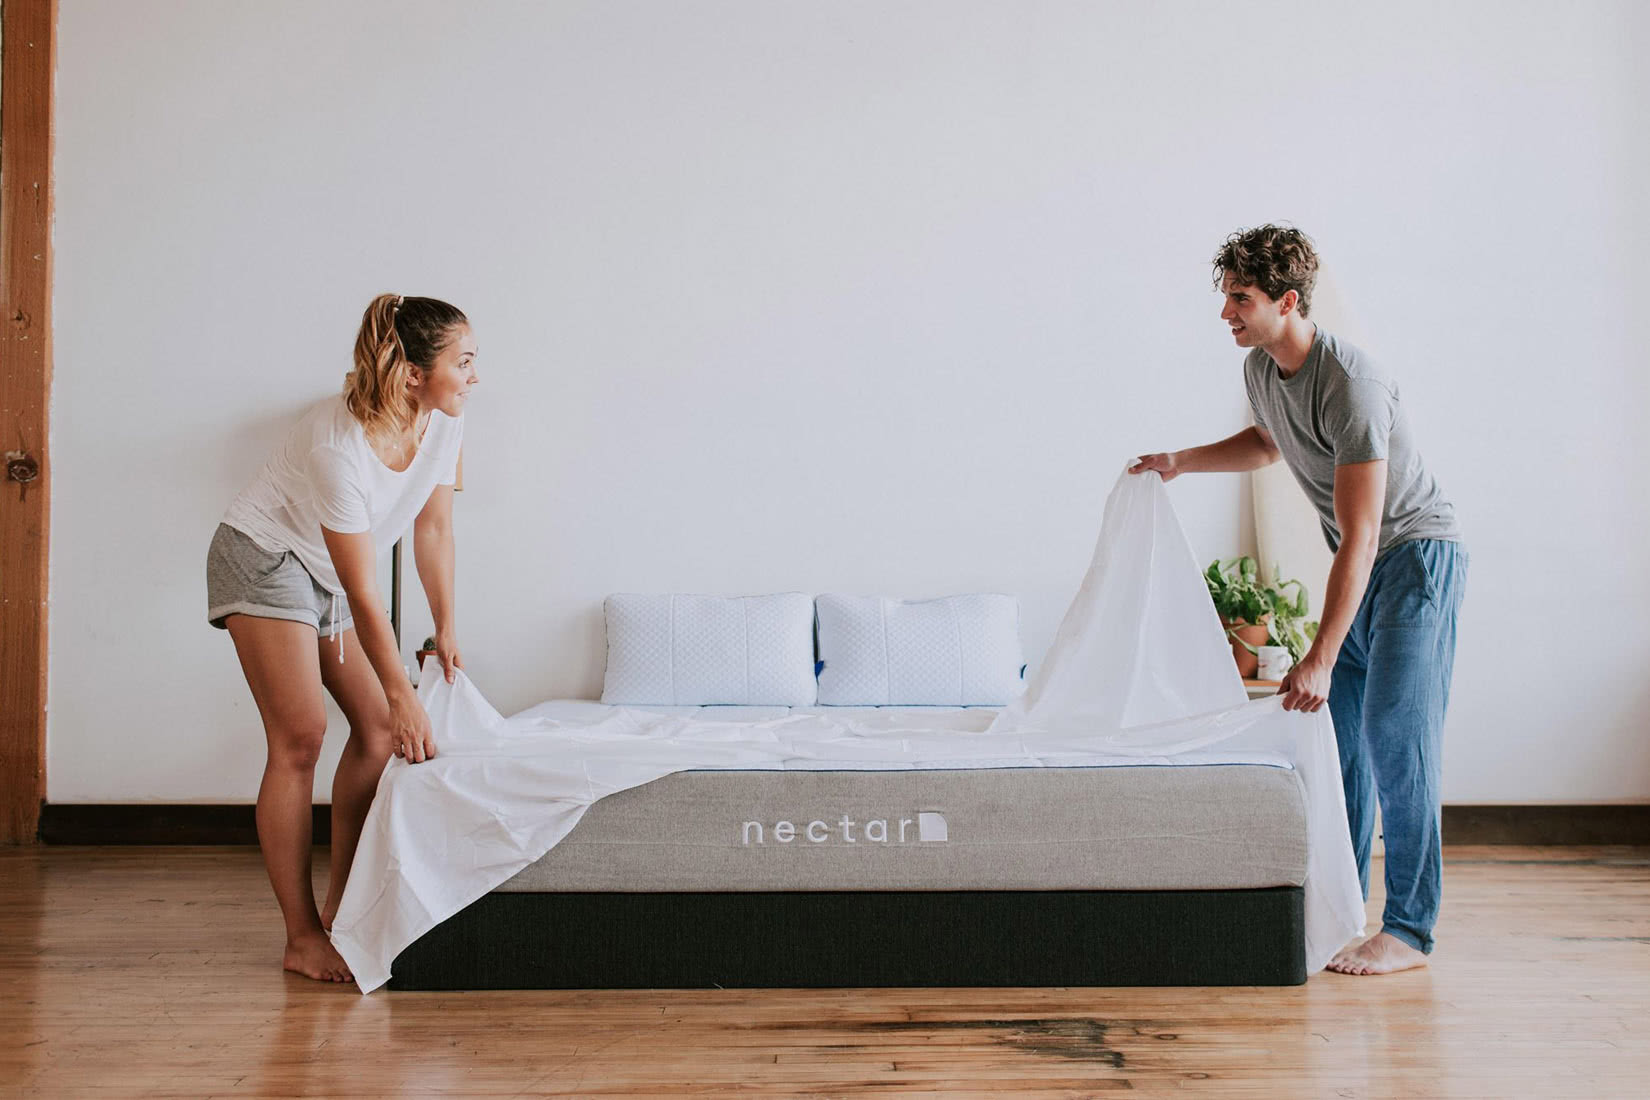 15 Best Luxury Mattresses Top Rated Mattress Reviewed (2021 Guide)